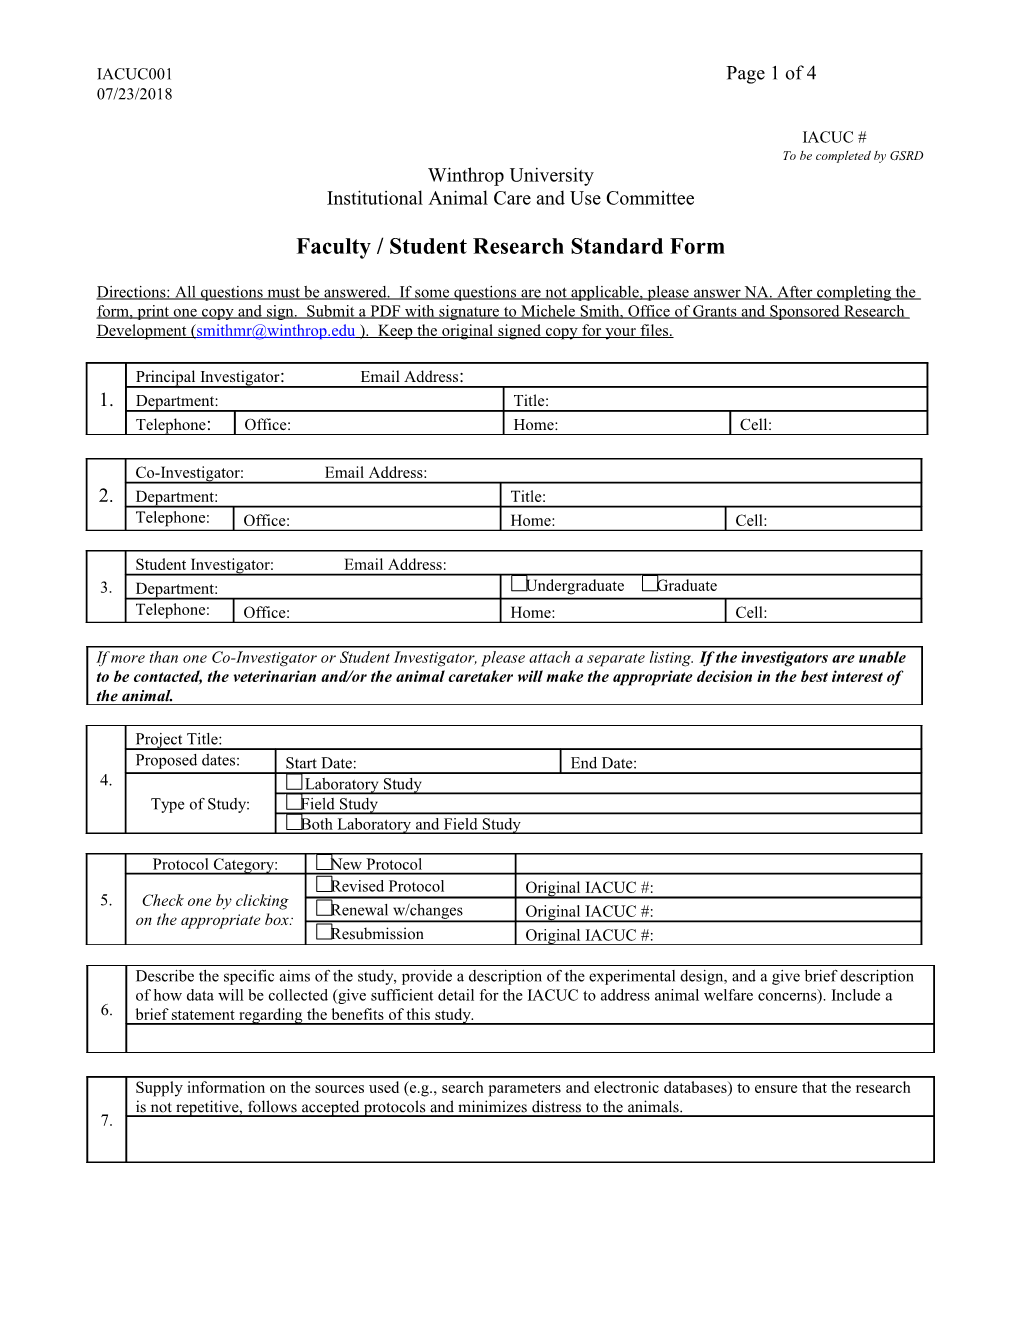 Faculty / Student Research Standard Form